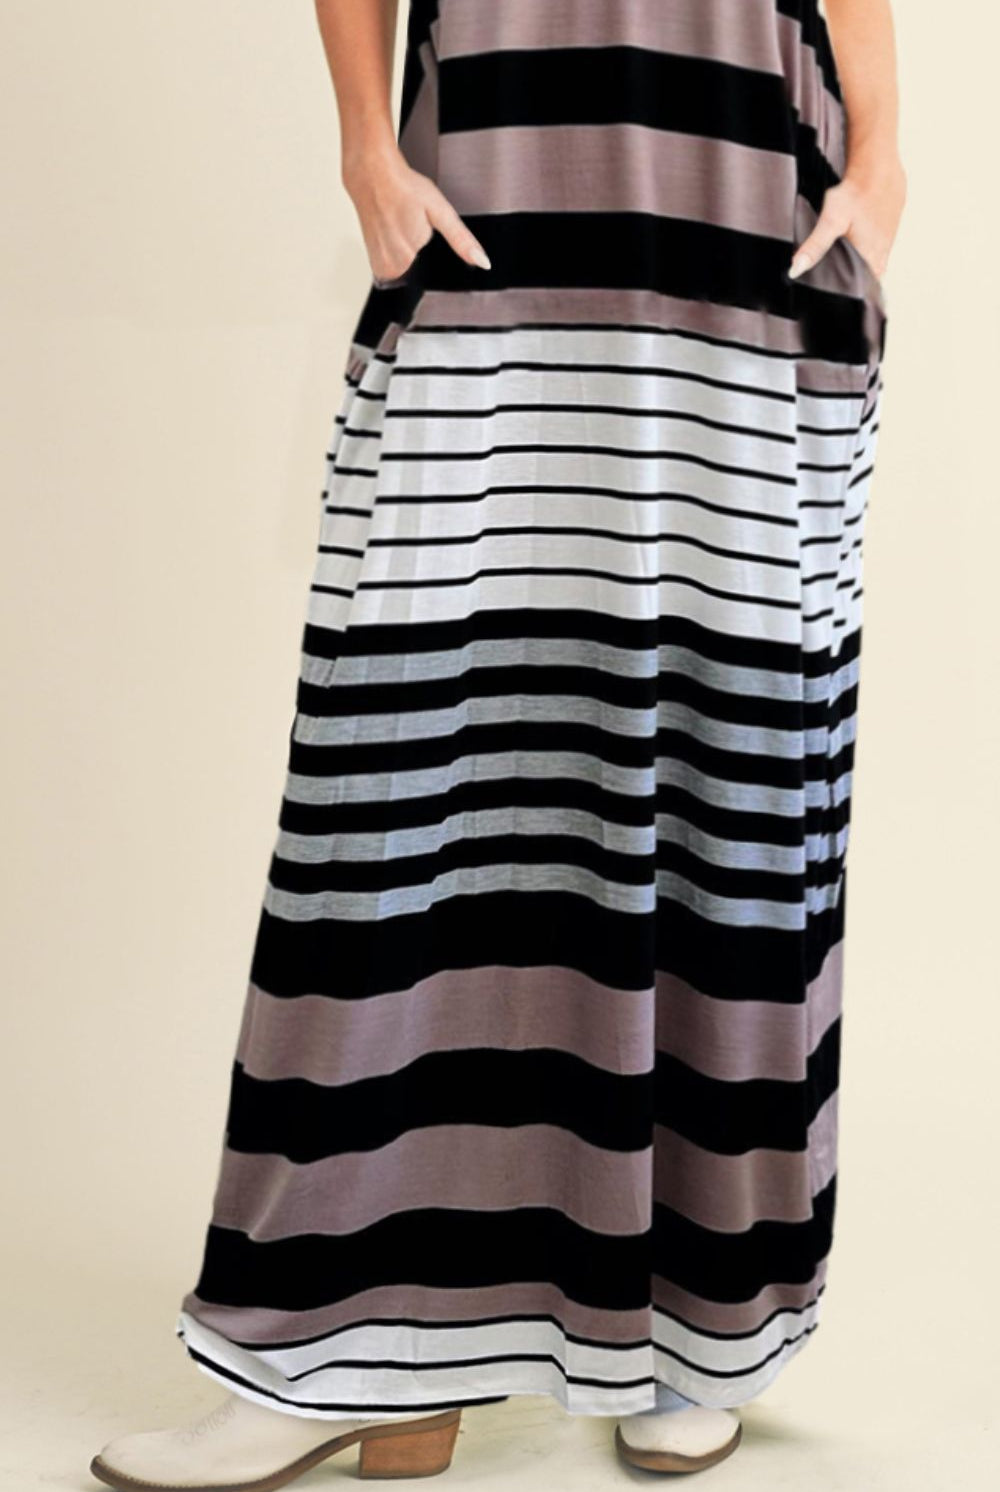 Model elegantly wearing a striped black and white maxi camisole dress